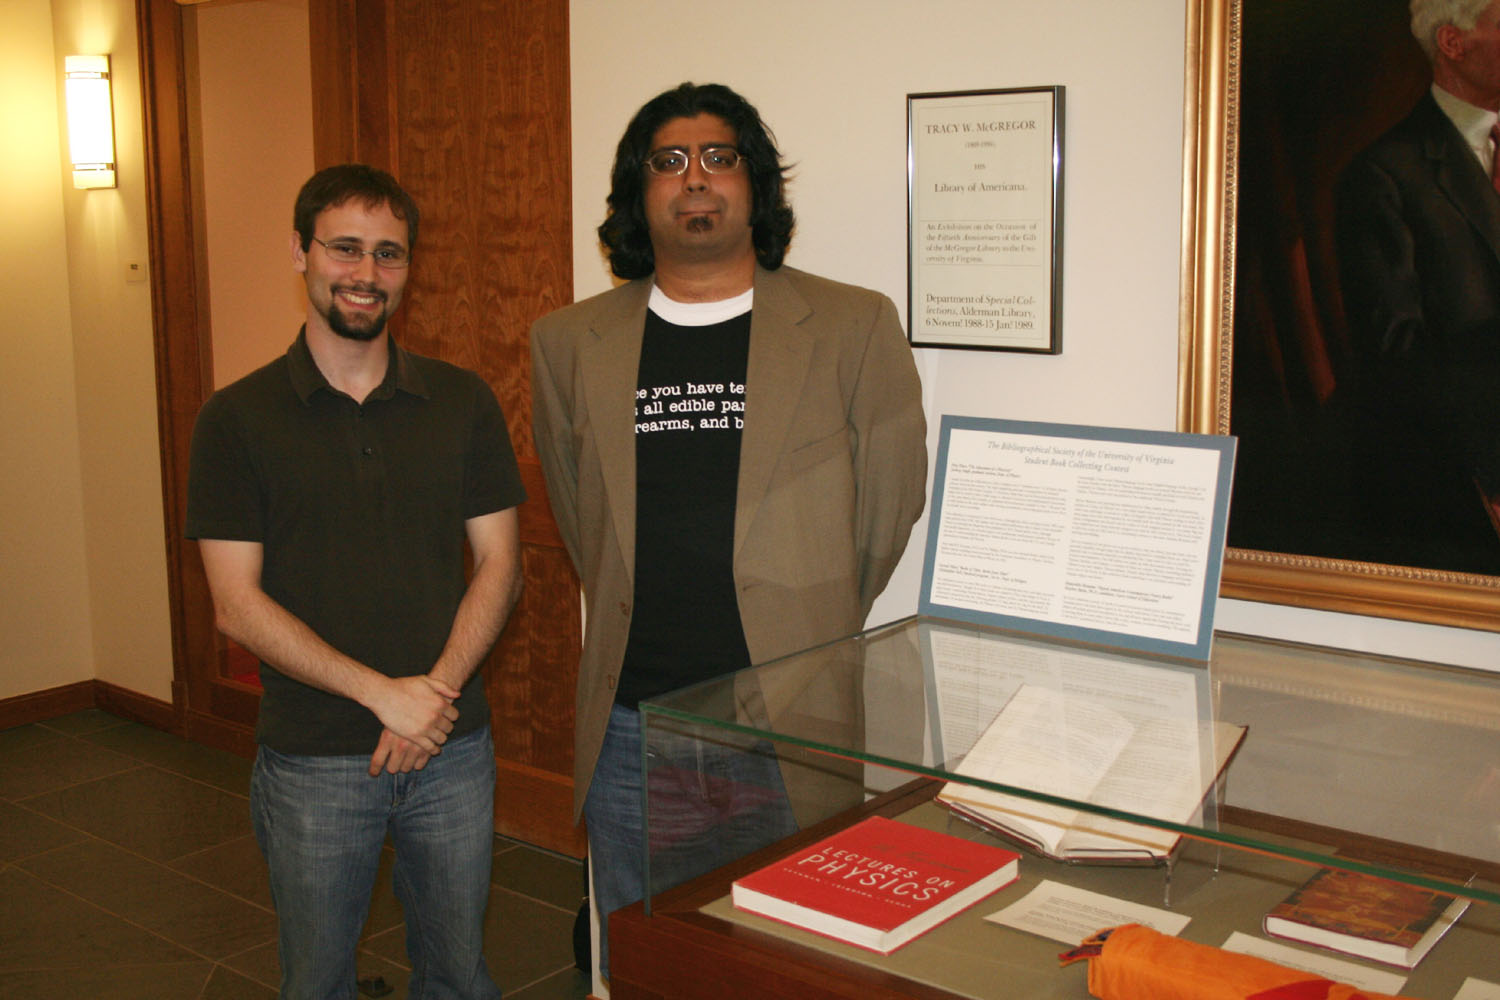 Christopher Bell and Jaideep Singh stand next to a glass case full of books